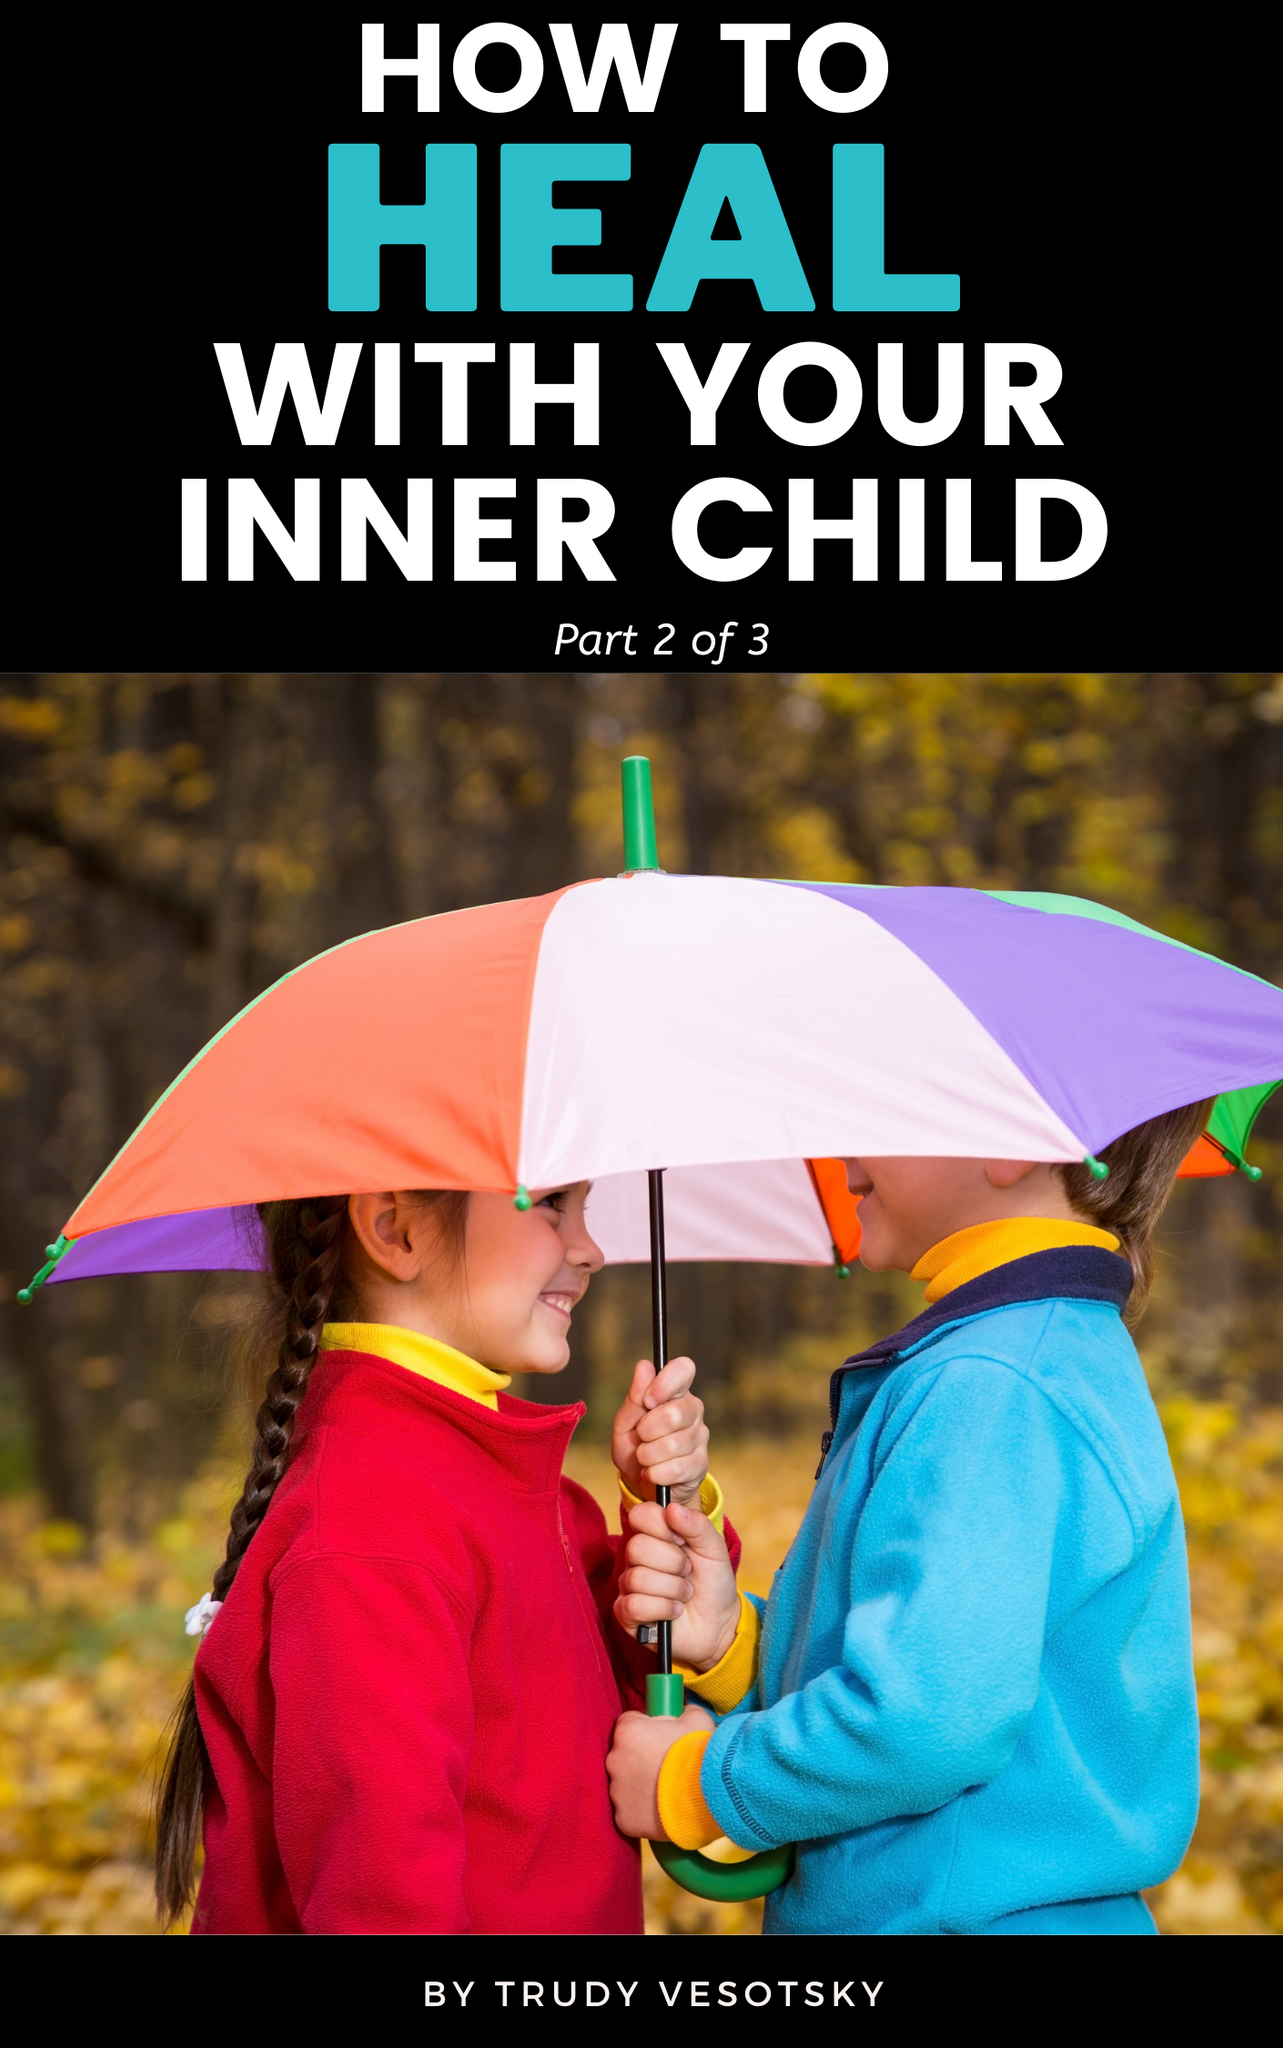 How to Heal your Inner Child - Part 2